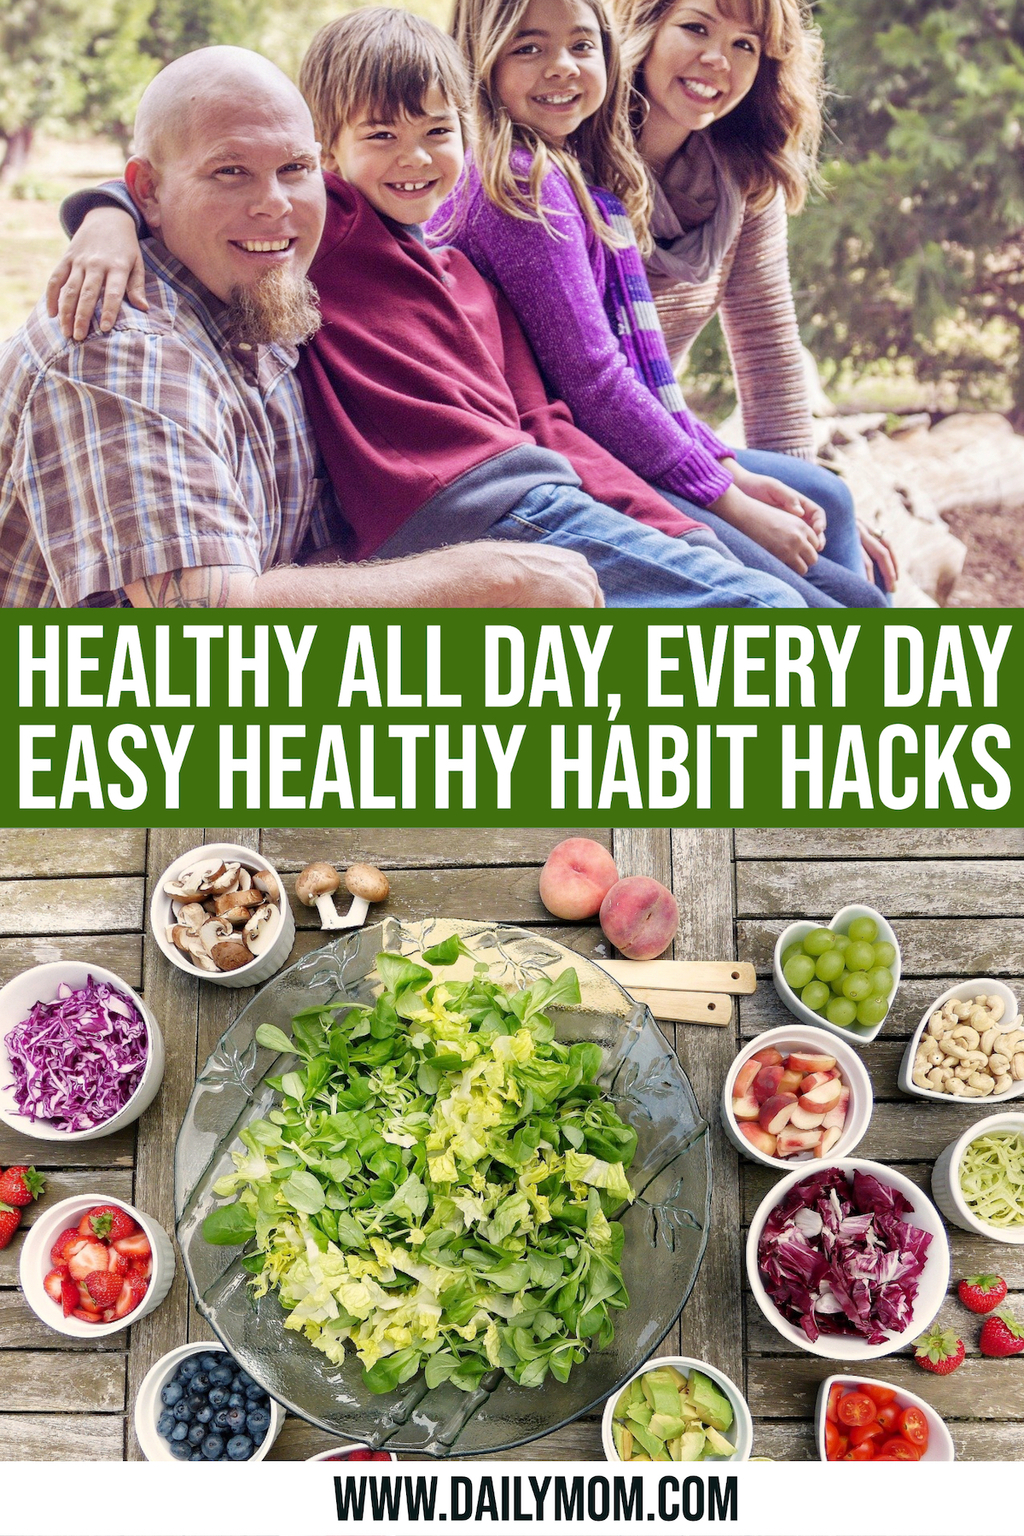 Creating A Healthy Lifestyle Is Easier Than You Realize: 18 Hacks To Help